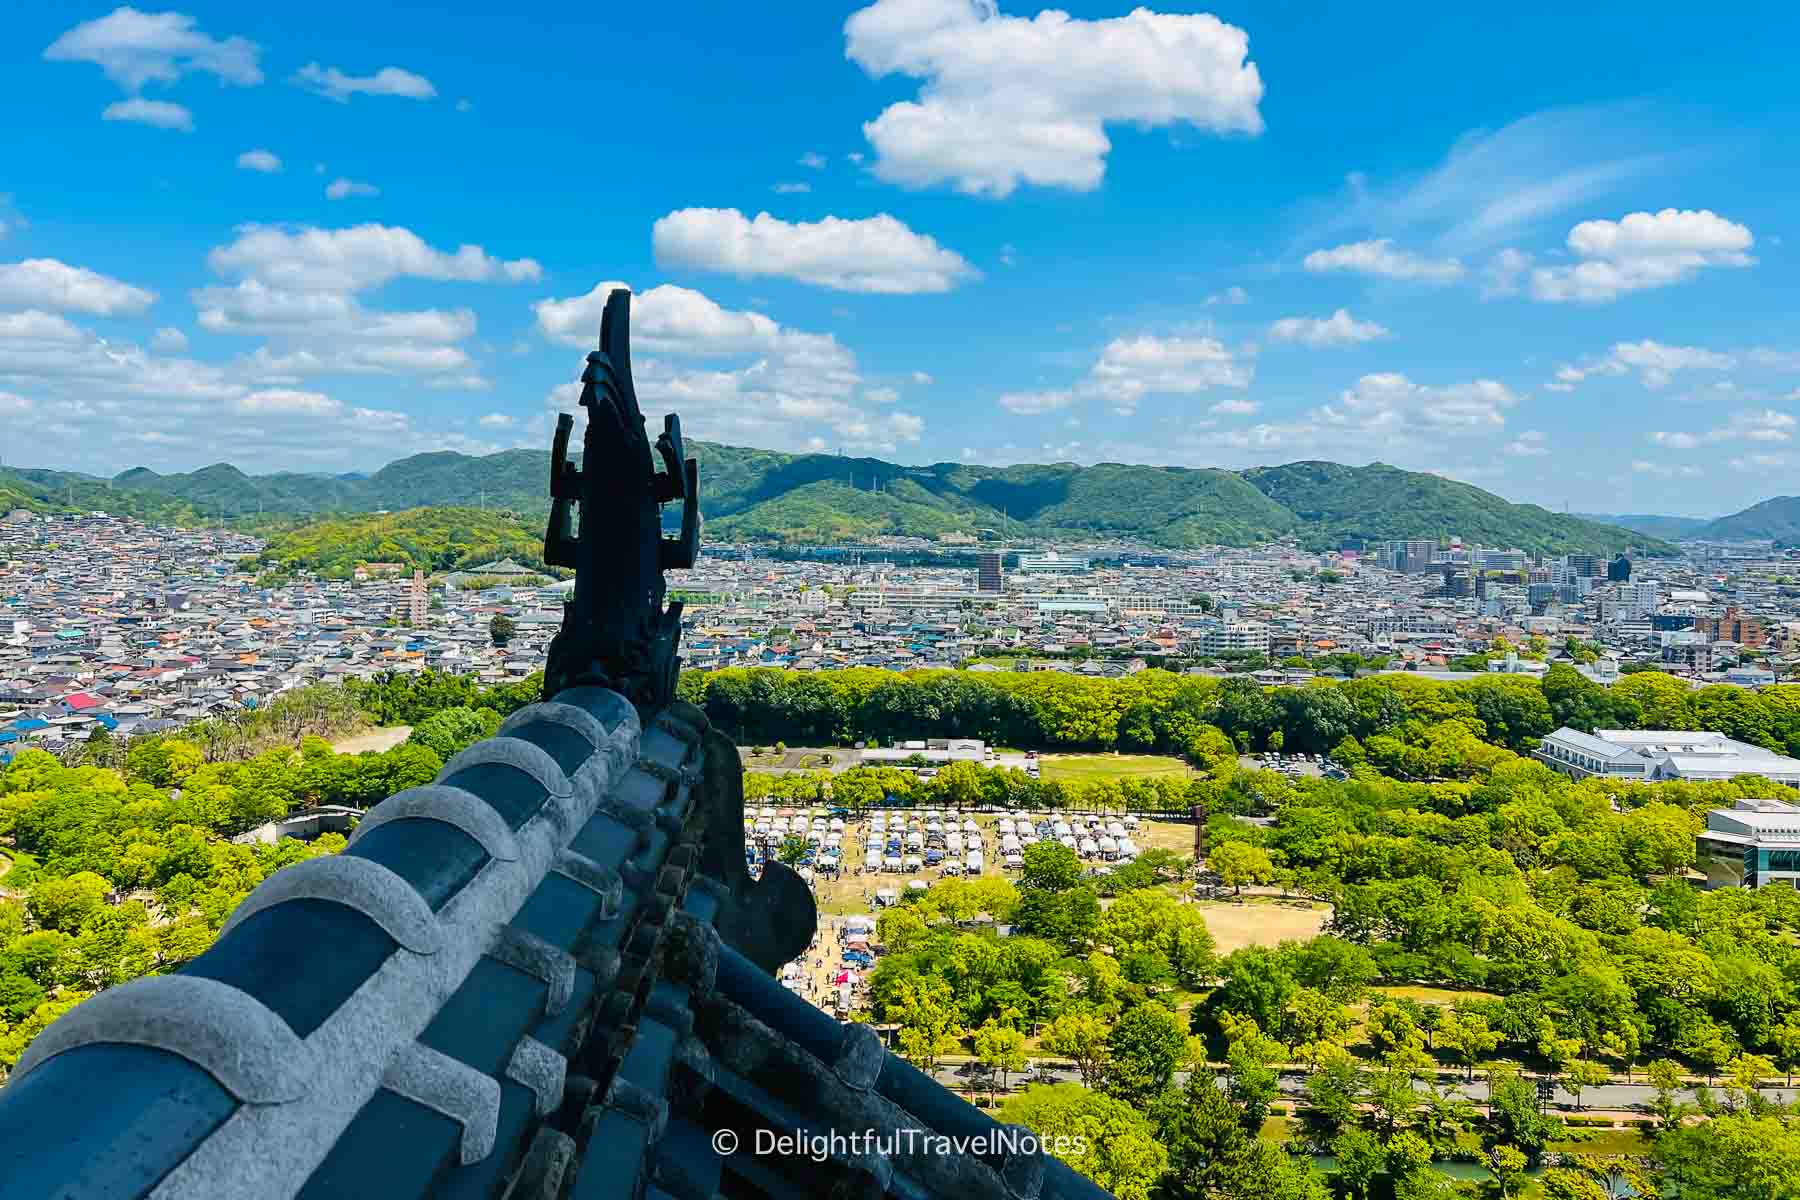 view of Himeji city from the top floor of the castle tower.